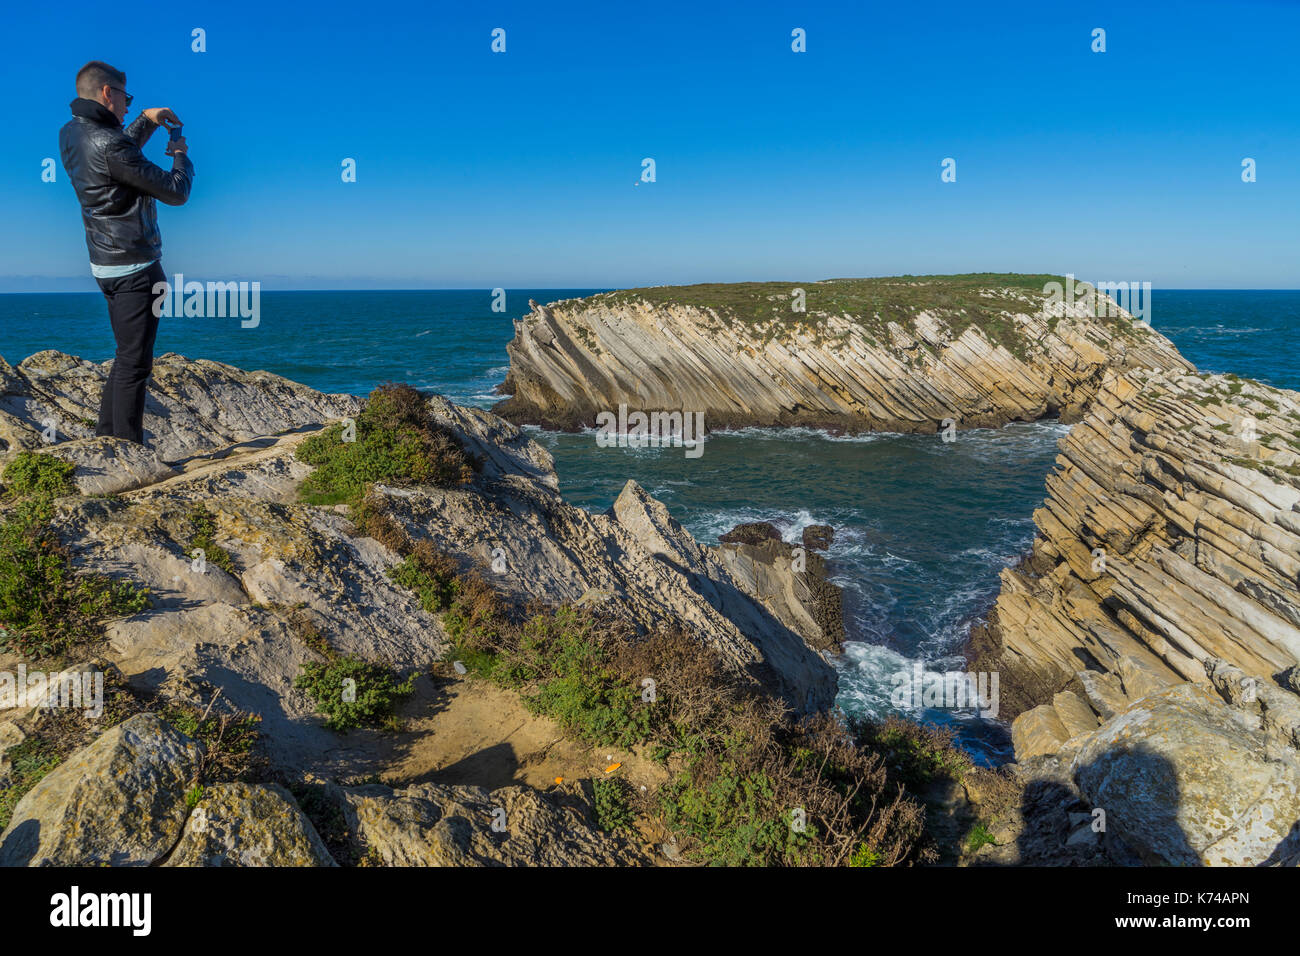 Man standing on a cliff top taking a photo of the waves and shore below Portugal Stock Photo